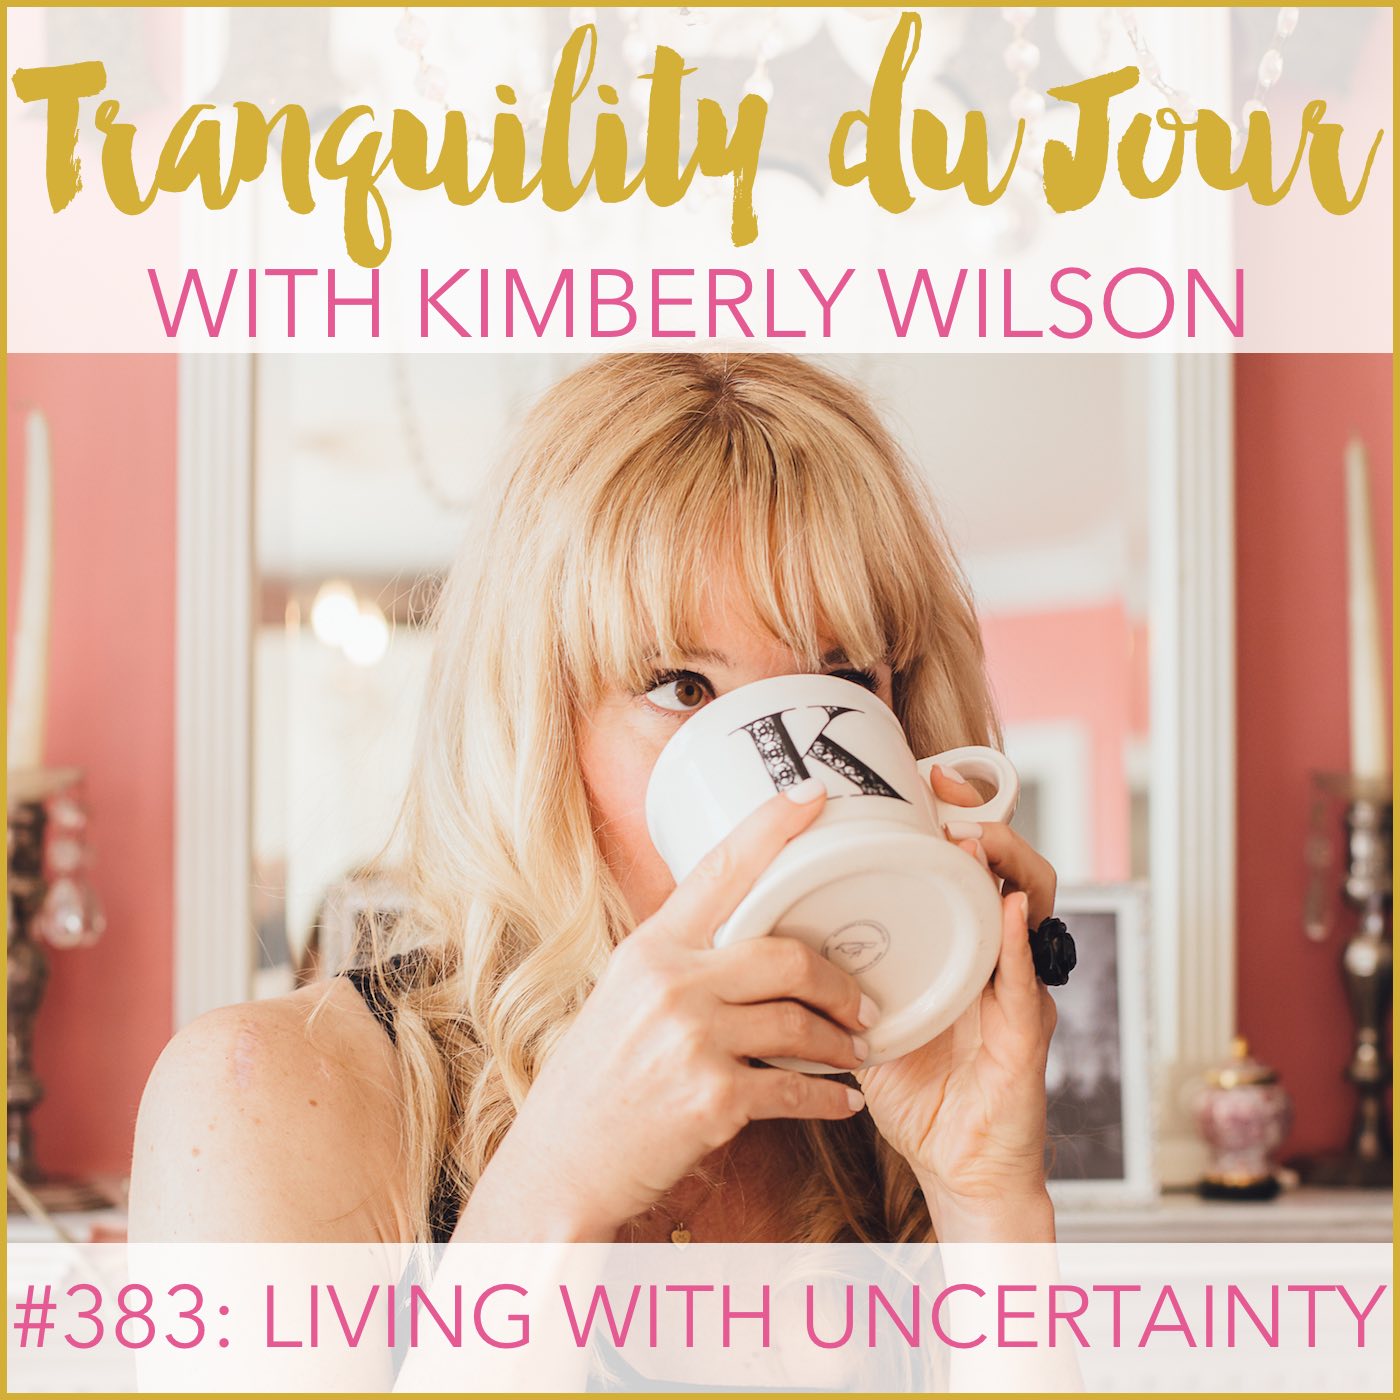 Tranquility du Jour #383: Living with Uncertainty